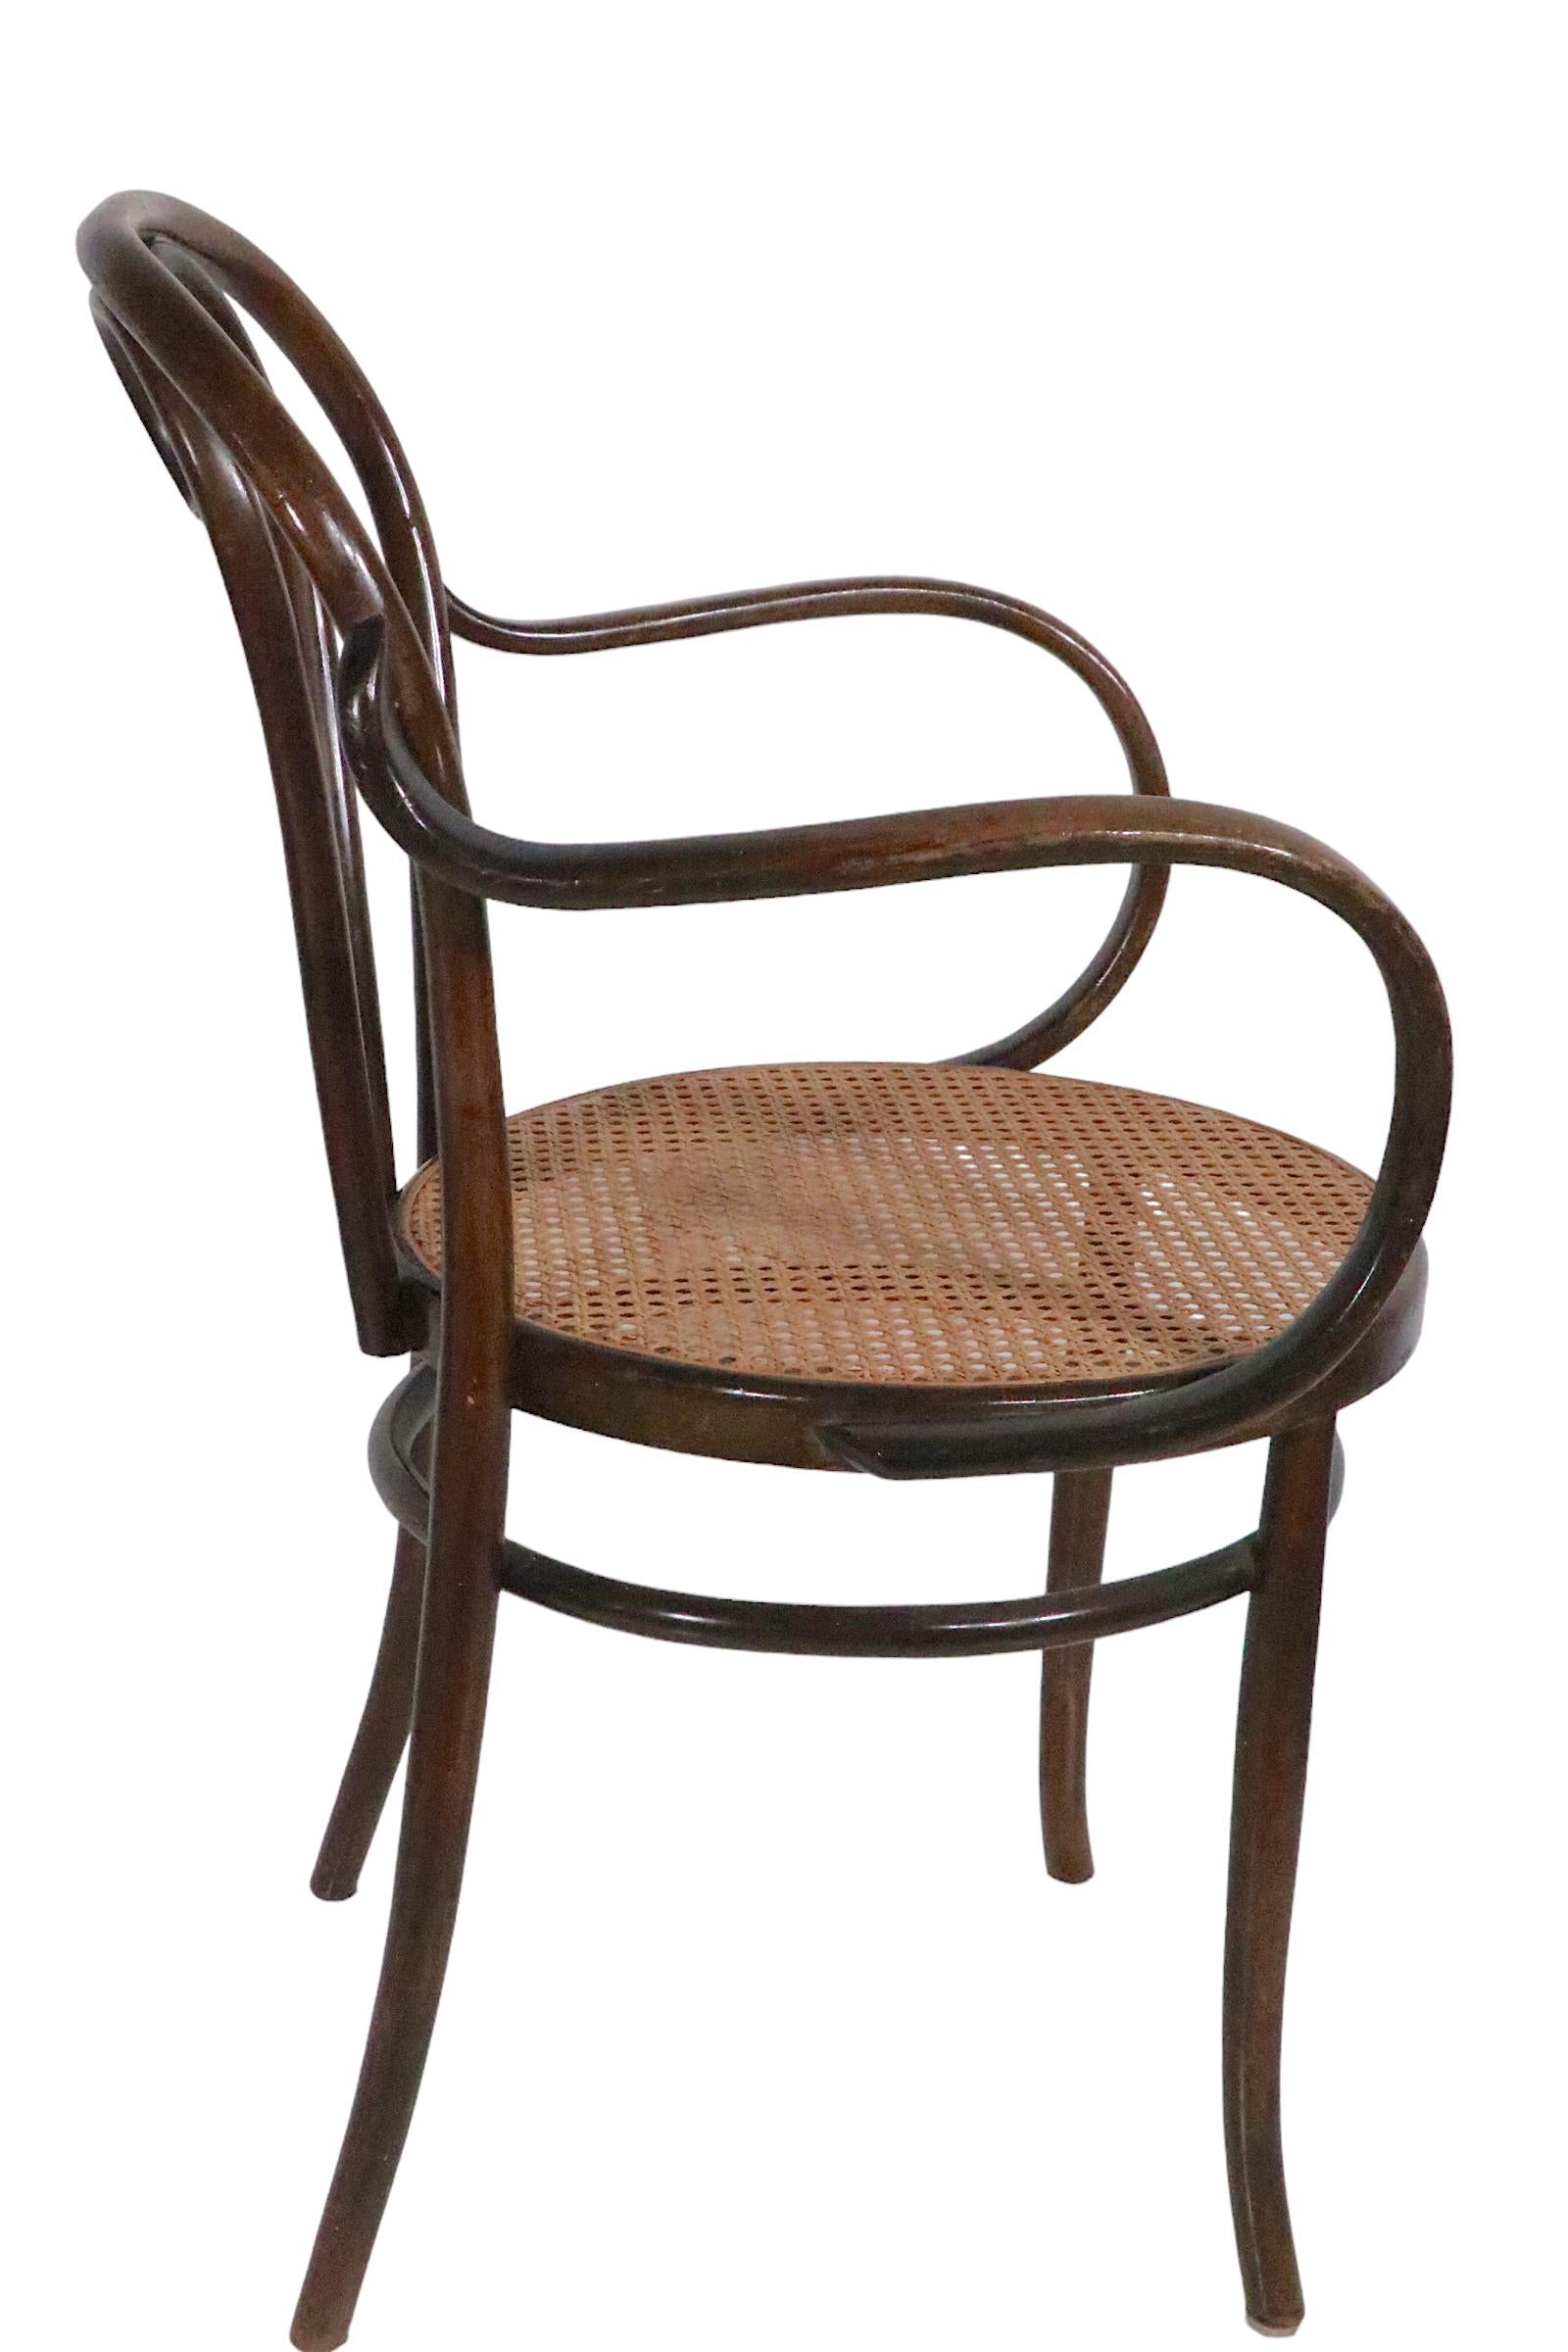 Pr. Vienesse Secessionist Thonet Bentwood  Cafe Bistro Dining  Arm Chairs  9